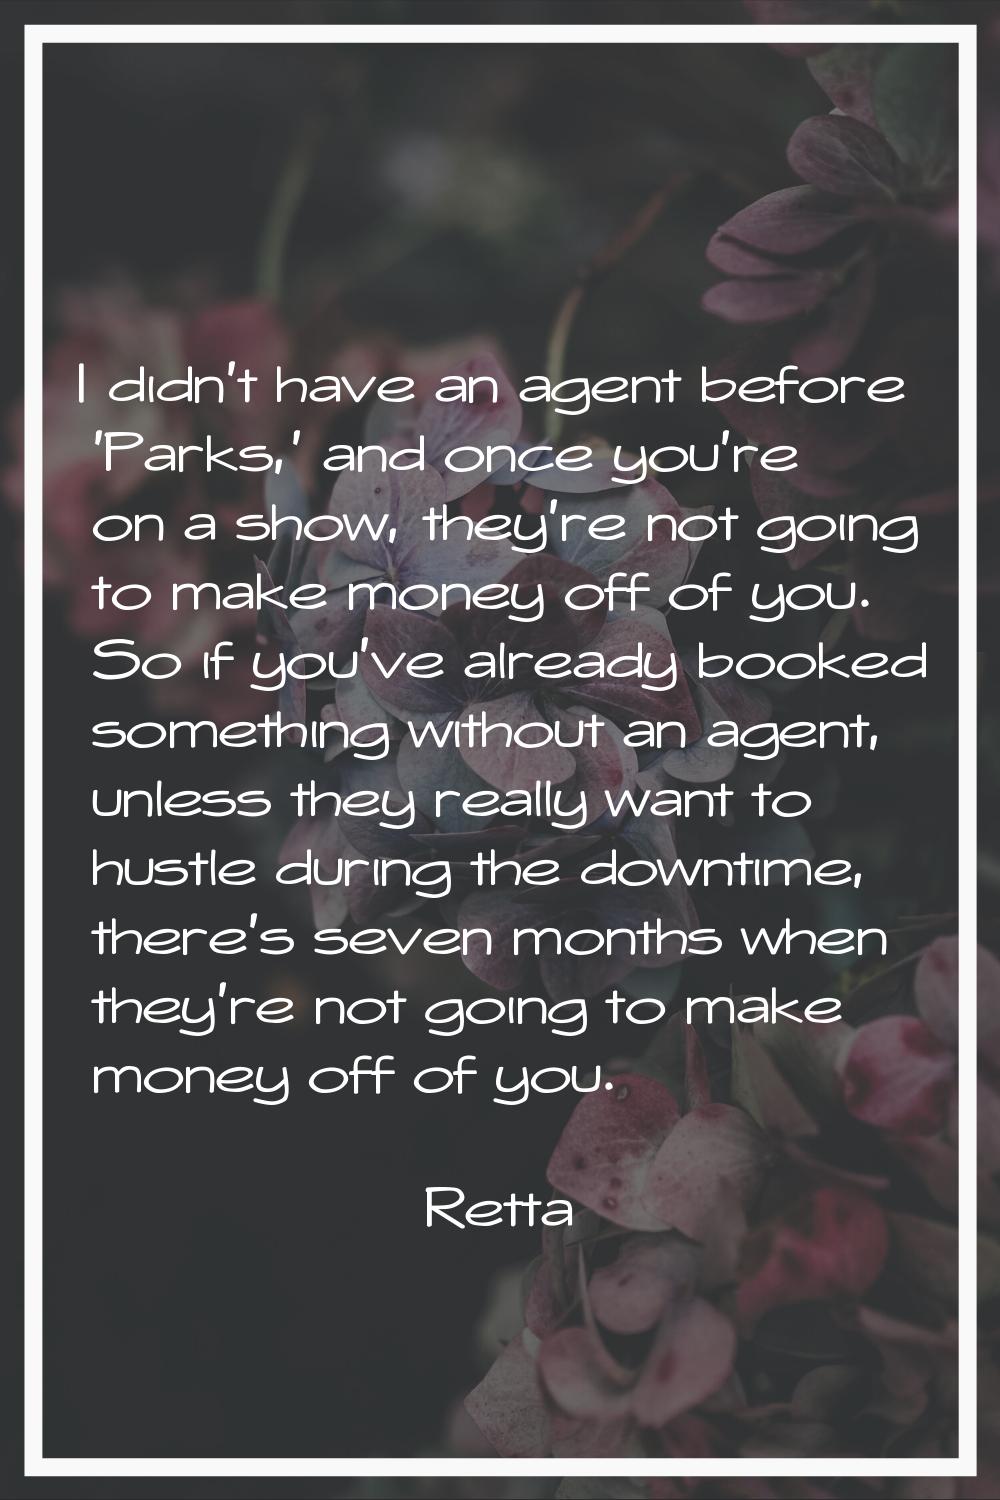 I didn't have an agent before 'Parks,' and once you're on a show, they're not going to make money o